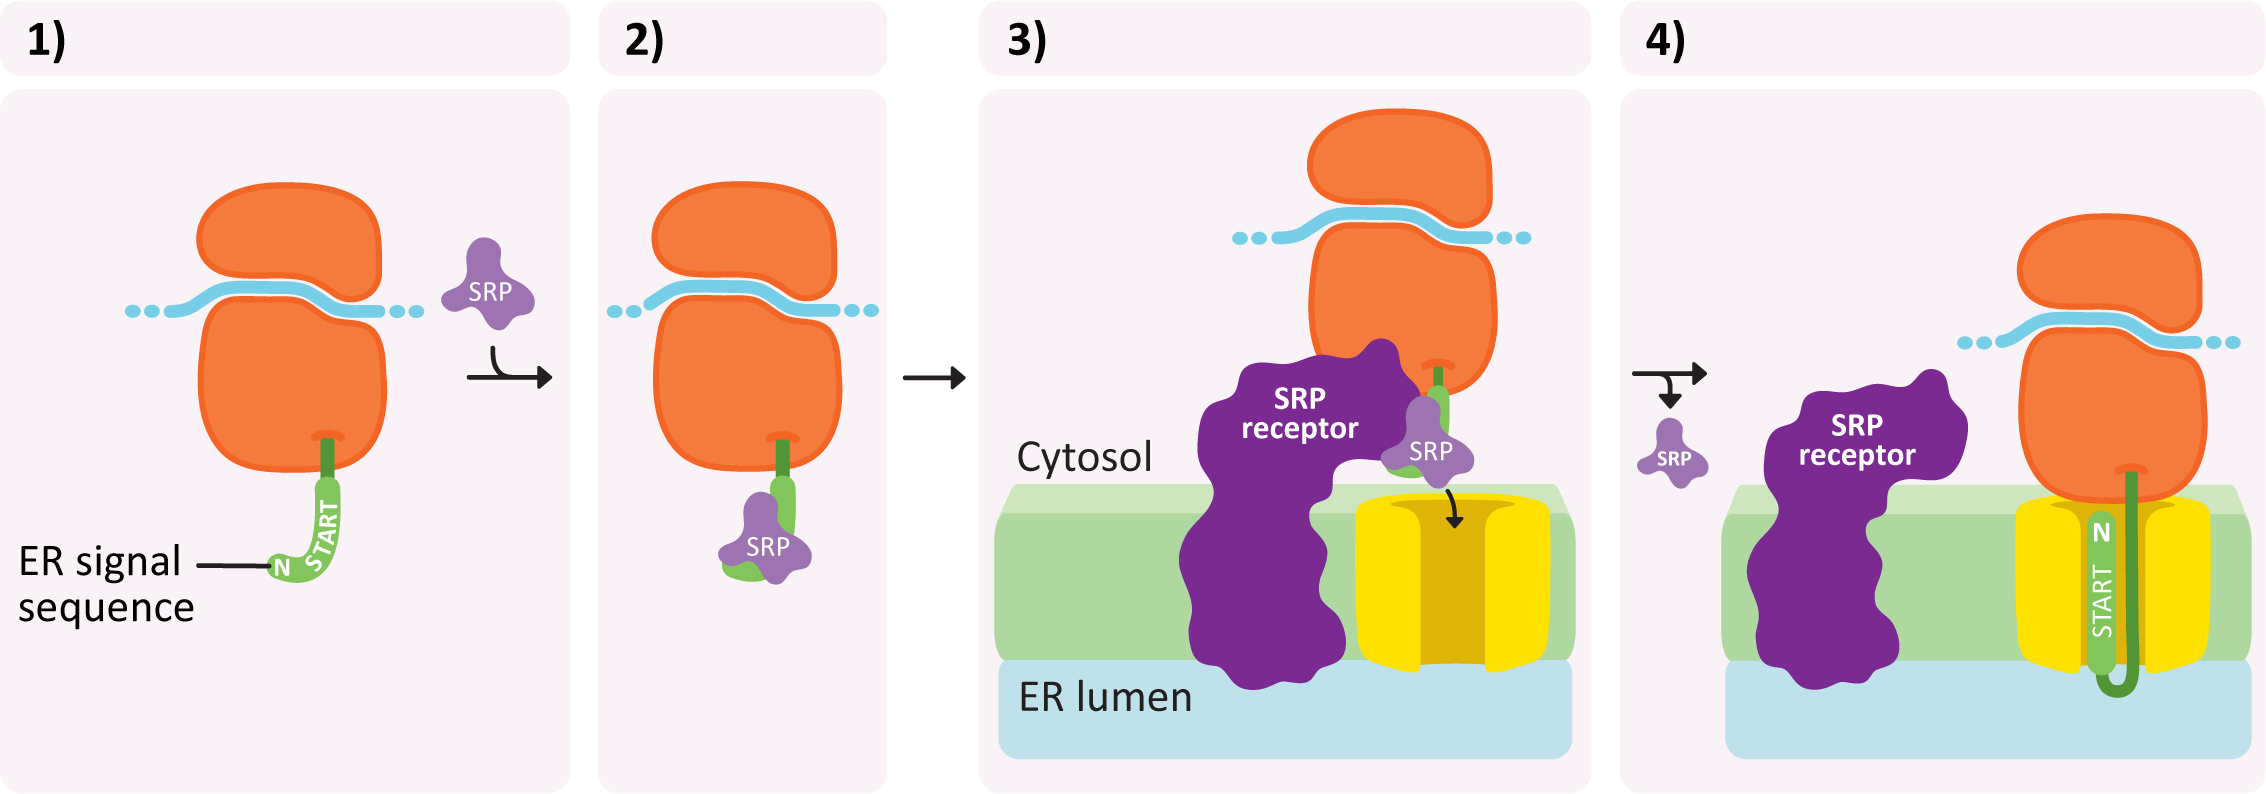 Mechanism of protein insertion into the ER